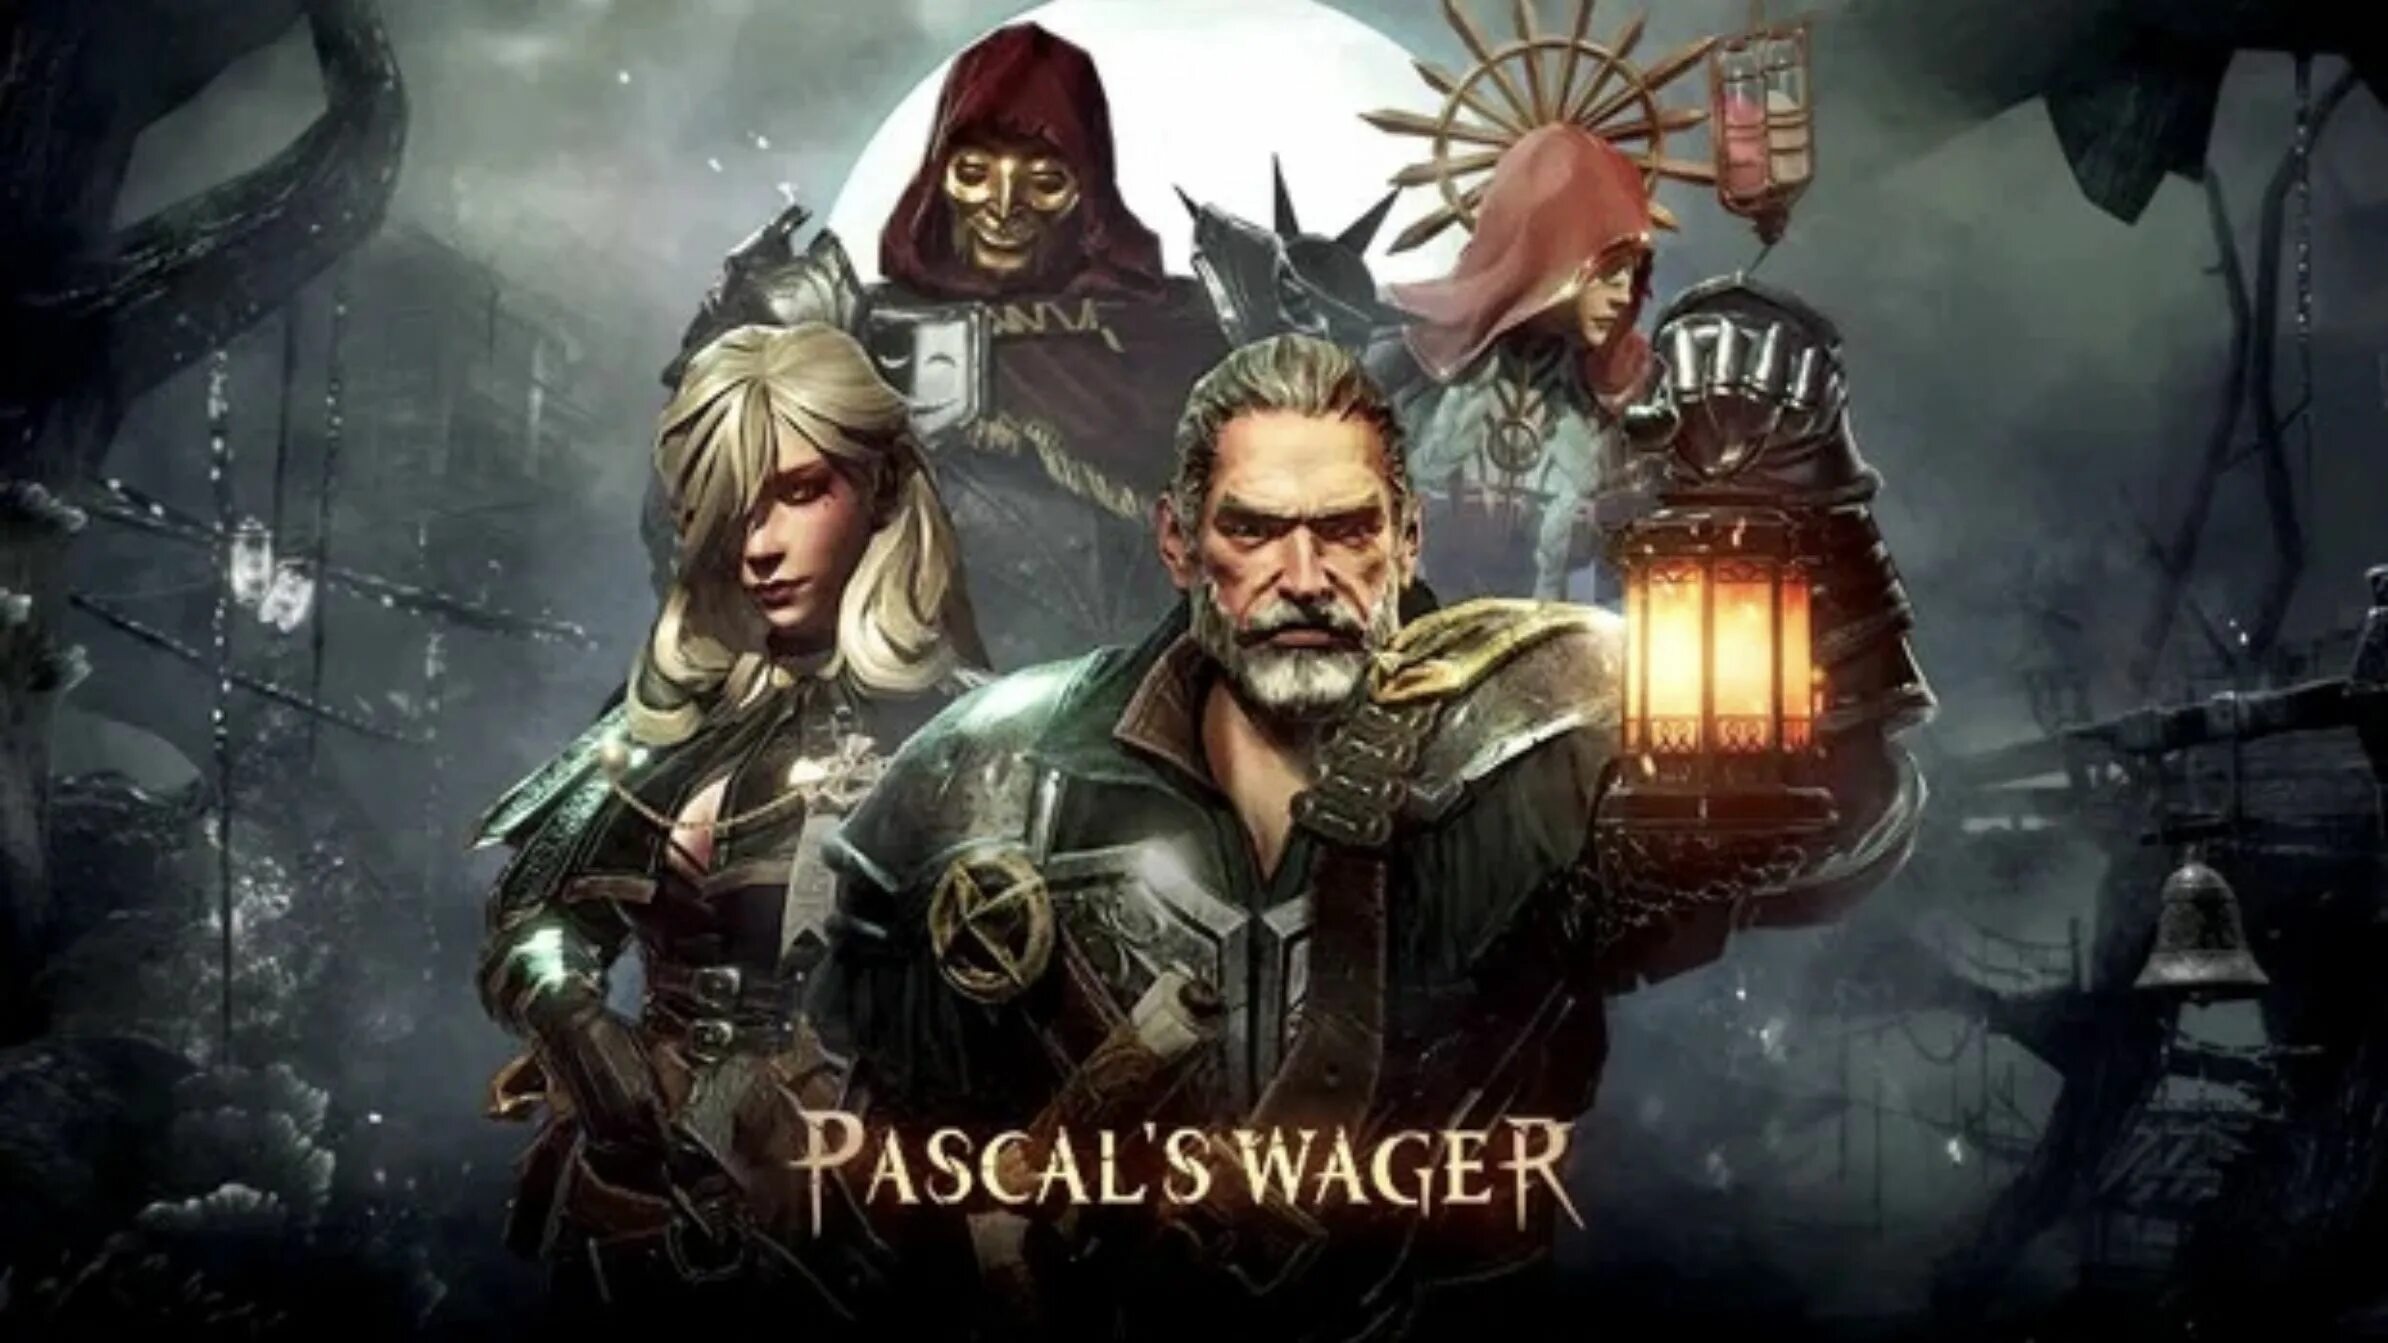 Pascals wager definitive edition. Pascal's Wager: Definitive Edition. Pascal Wager Android. Pascal's Wager на ПК. Pascal's Wager Definitive Edition Нинтендо.